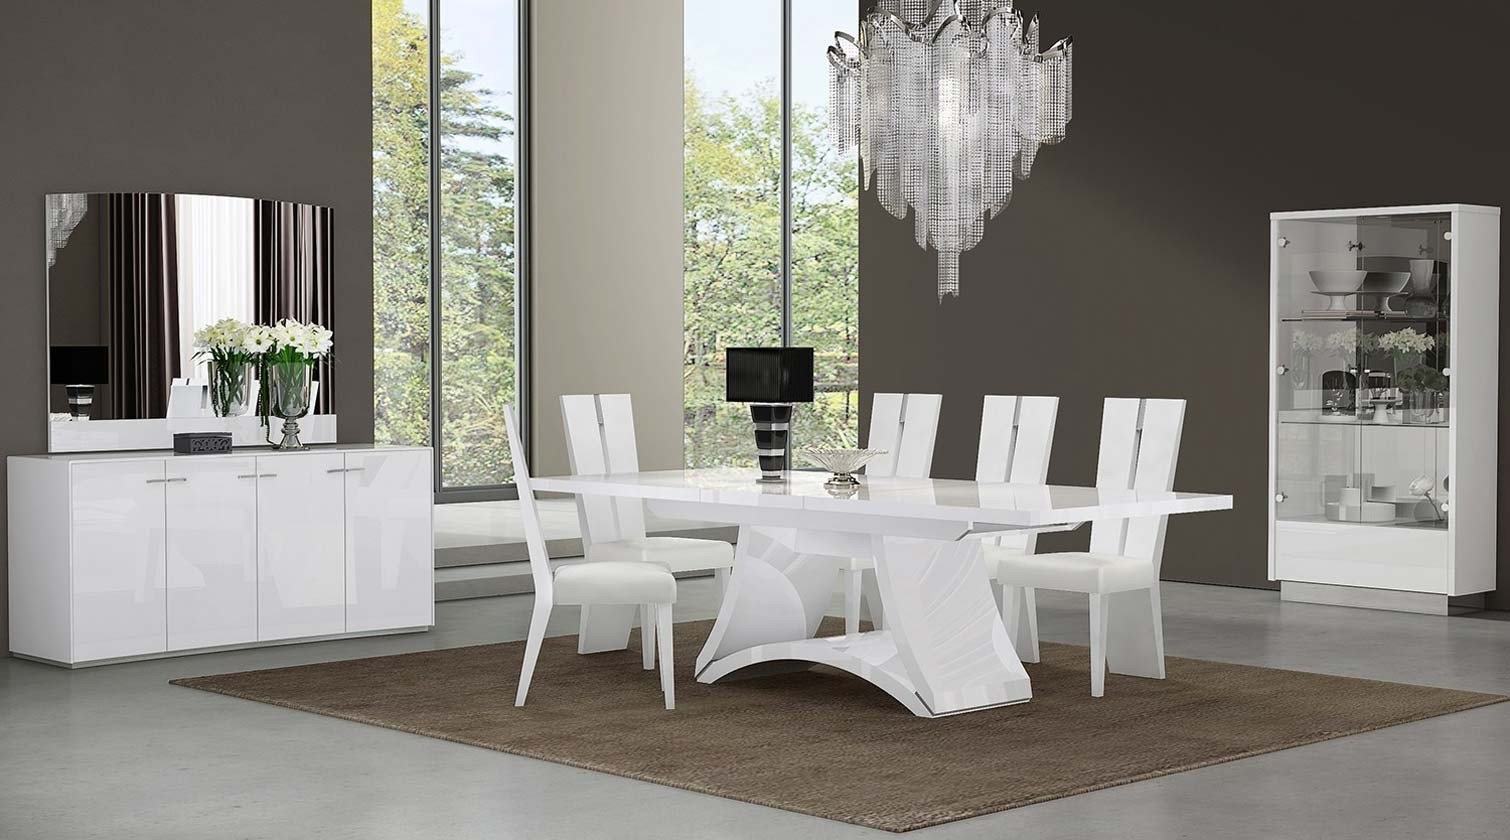 D313 Modern Dining Room Set In White Lacquer Finish pertaining to measurements 1510 X 840